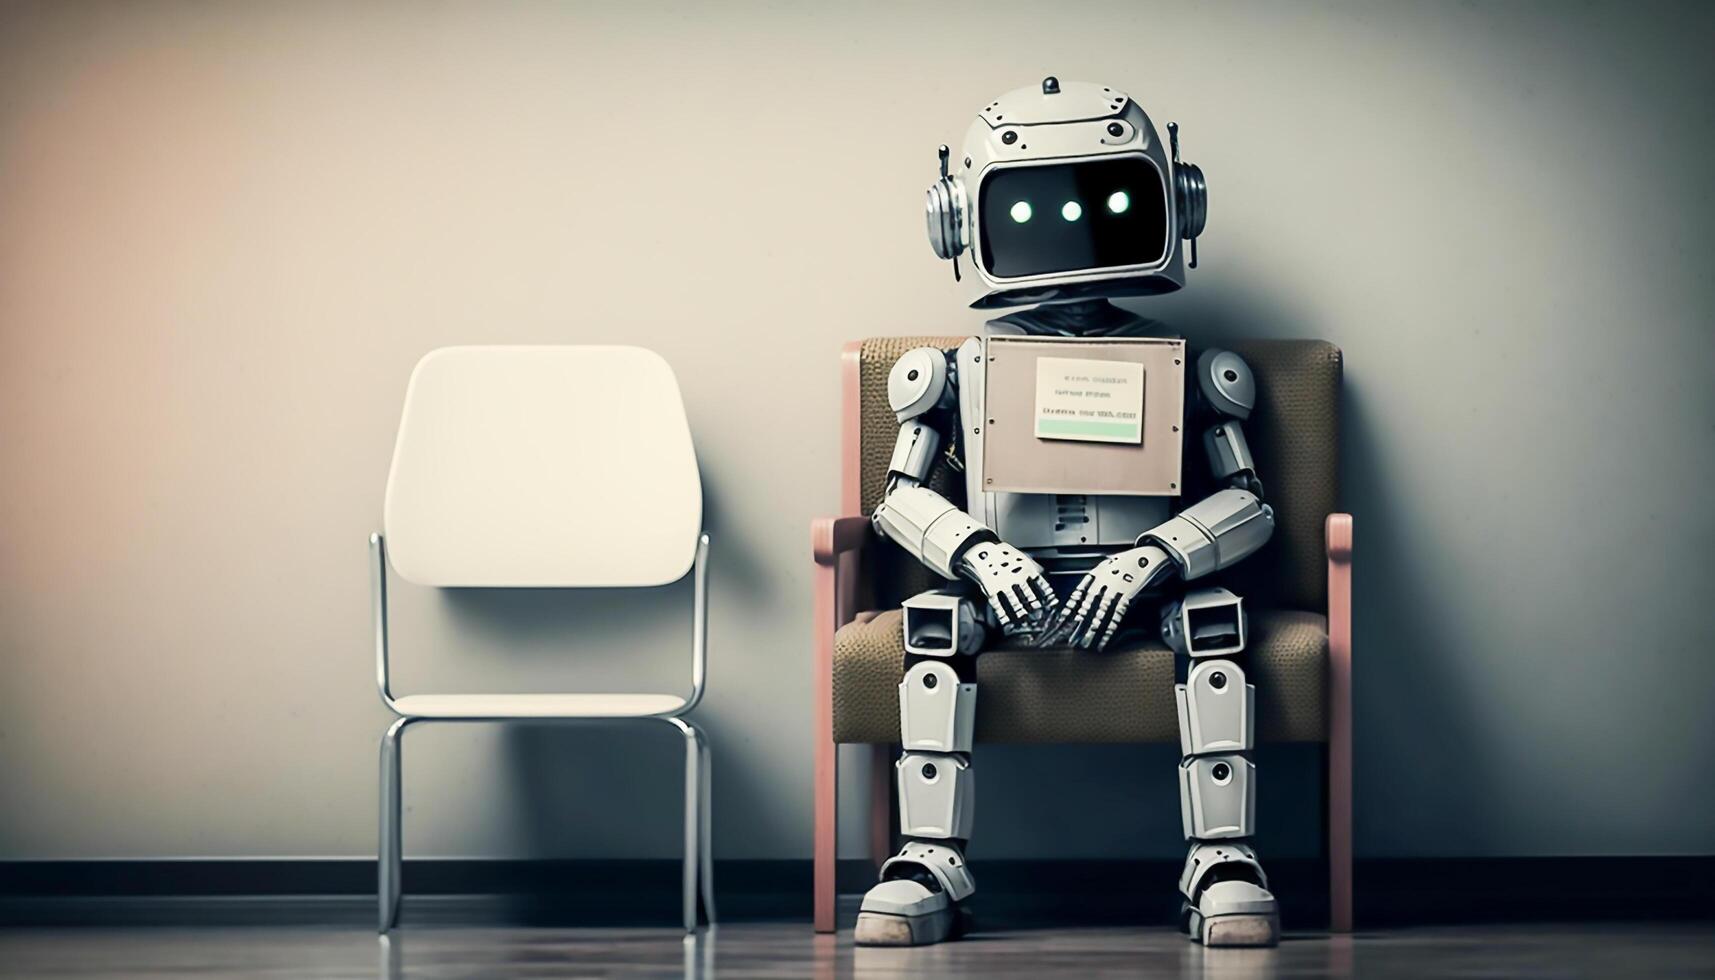 AI robot waiting on chair for a job interview, photo